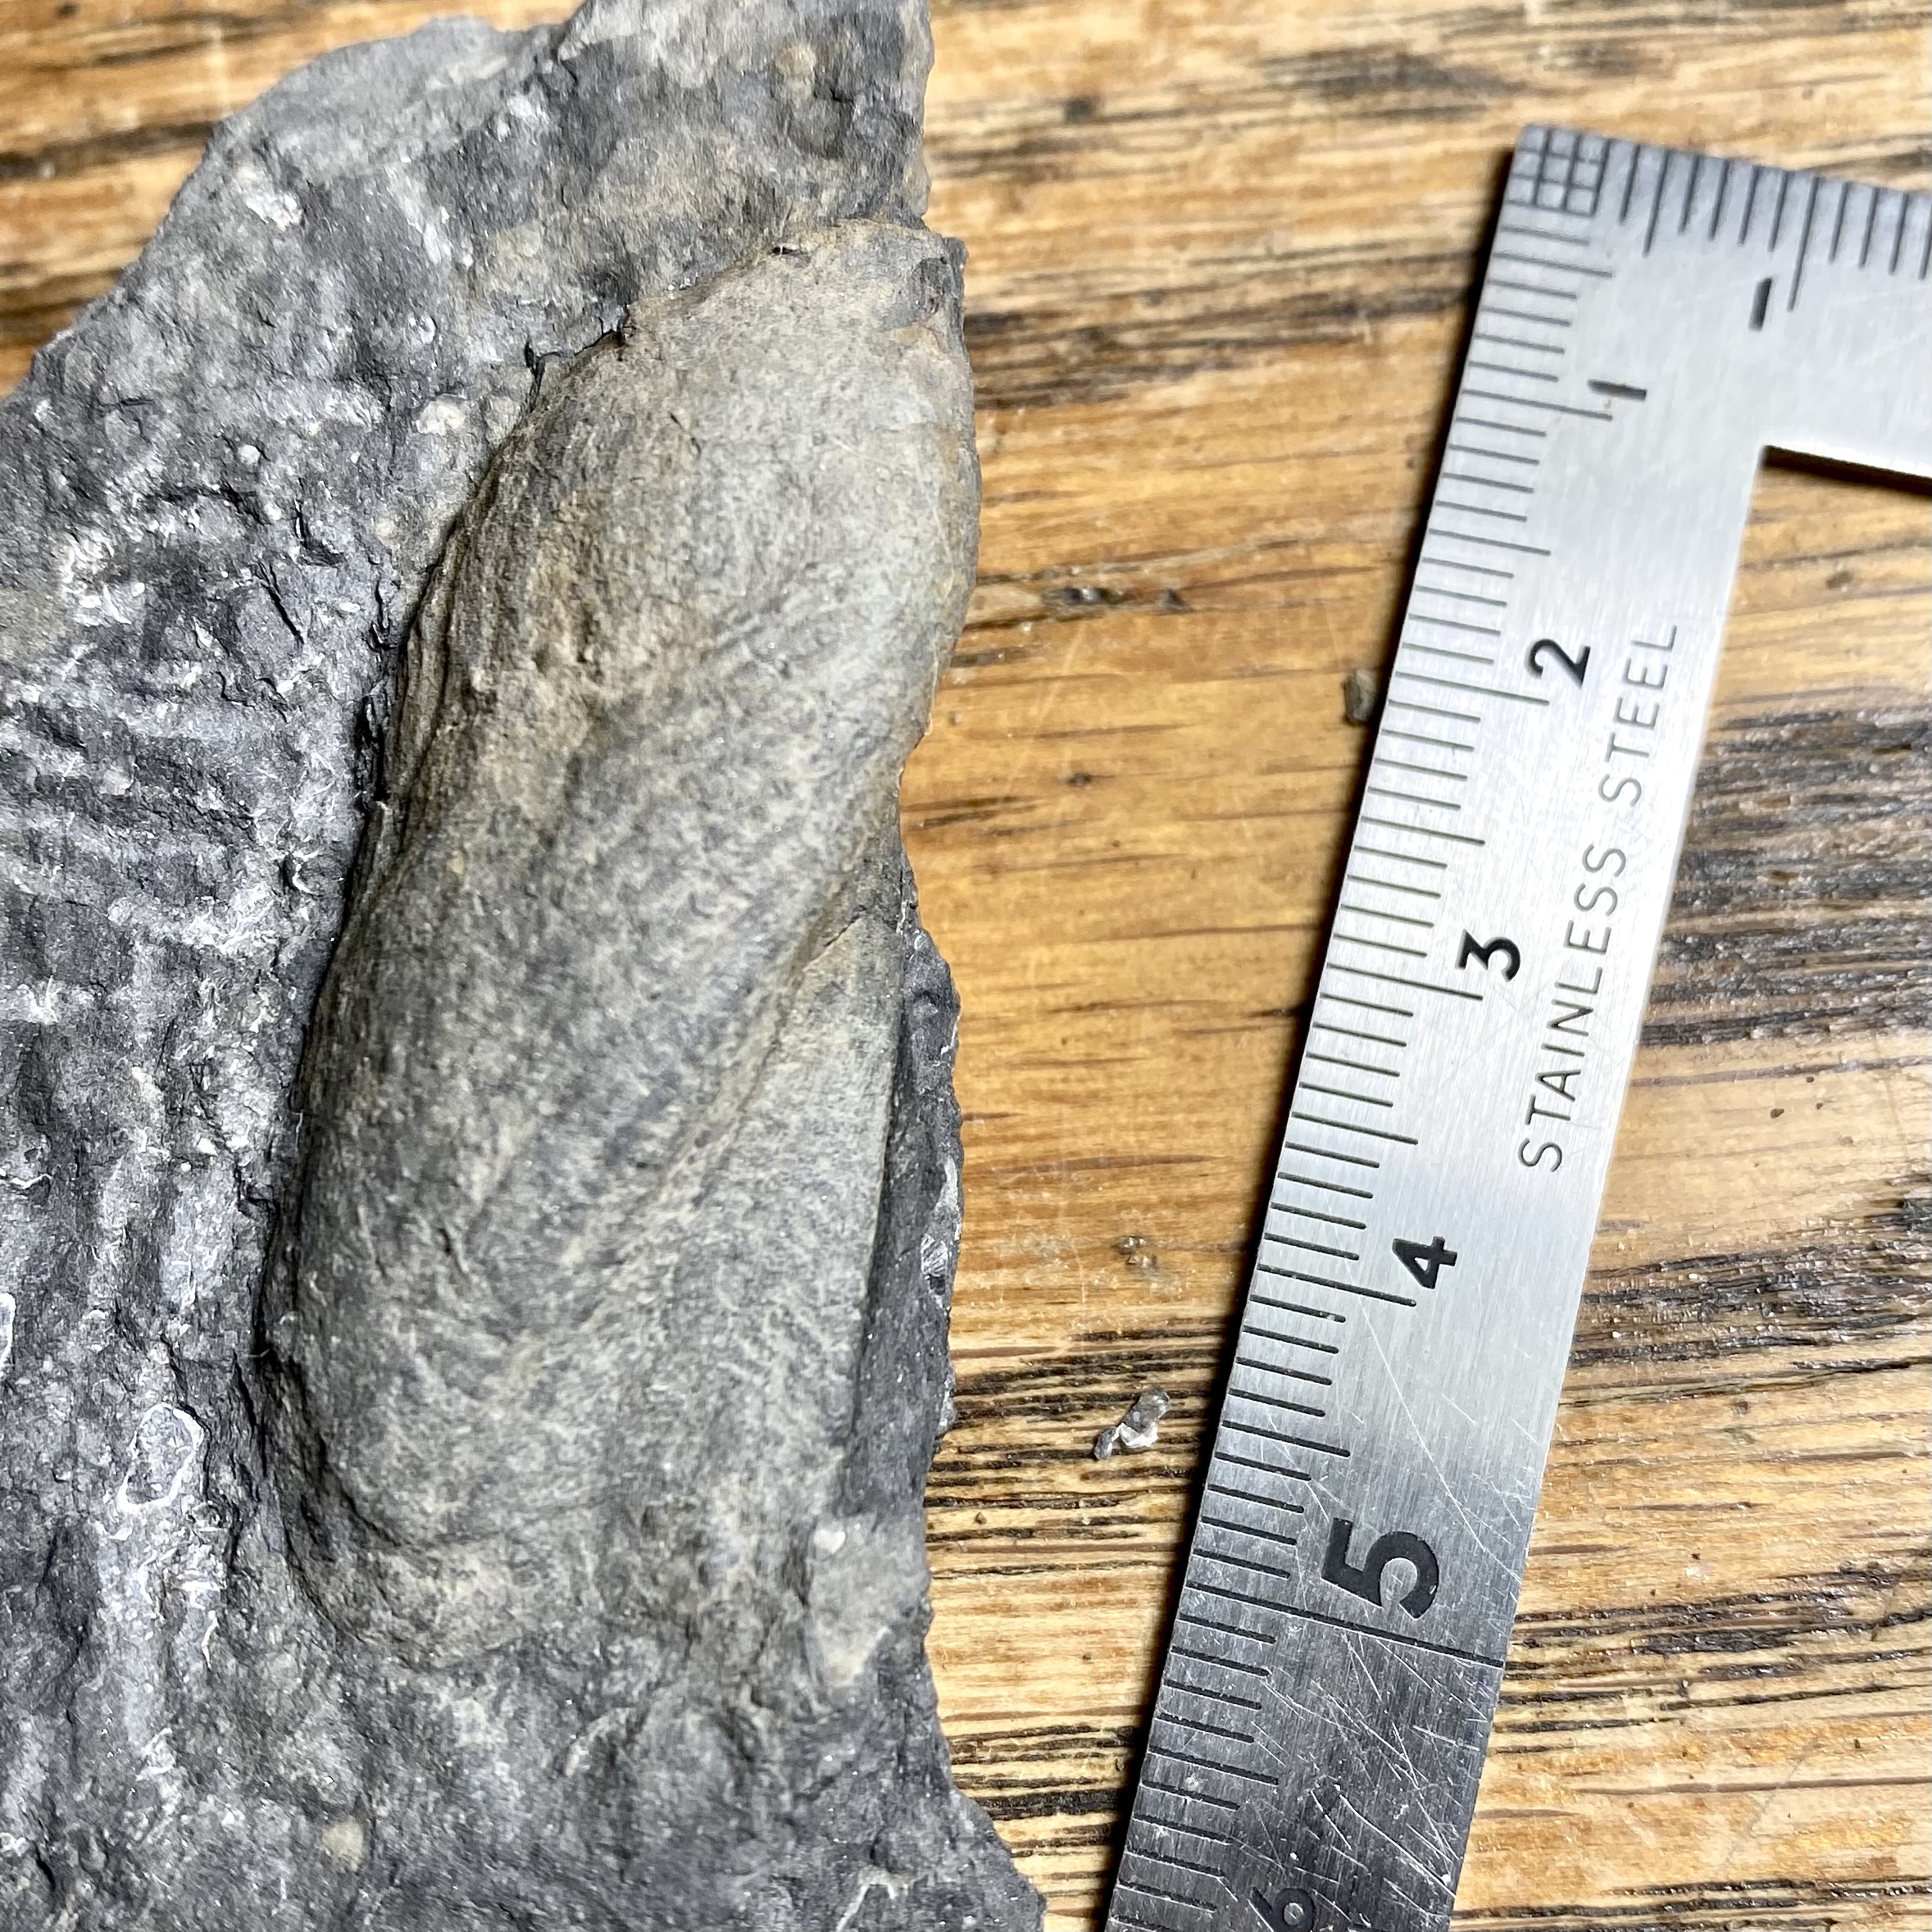 Parallelodon carbonarius with metric scale